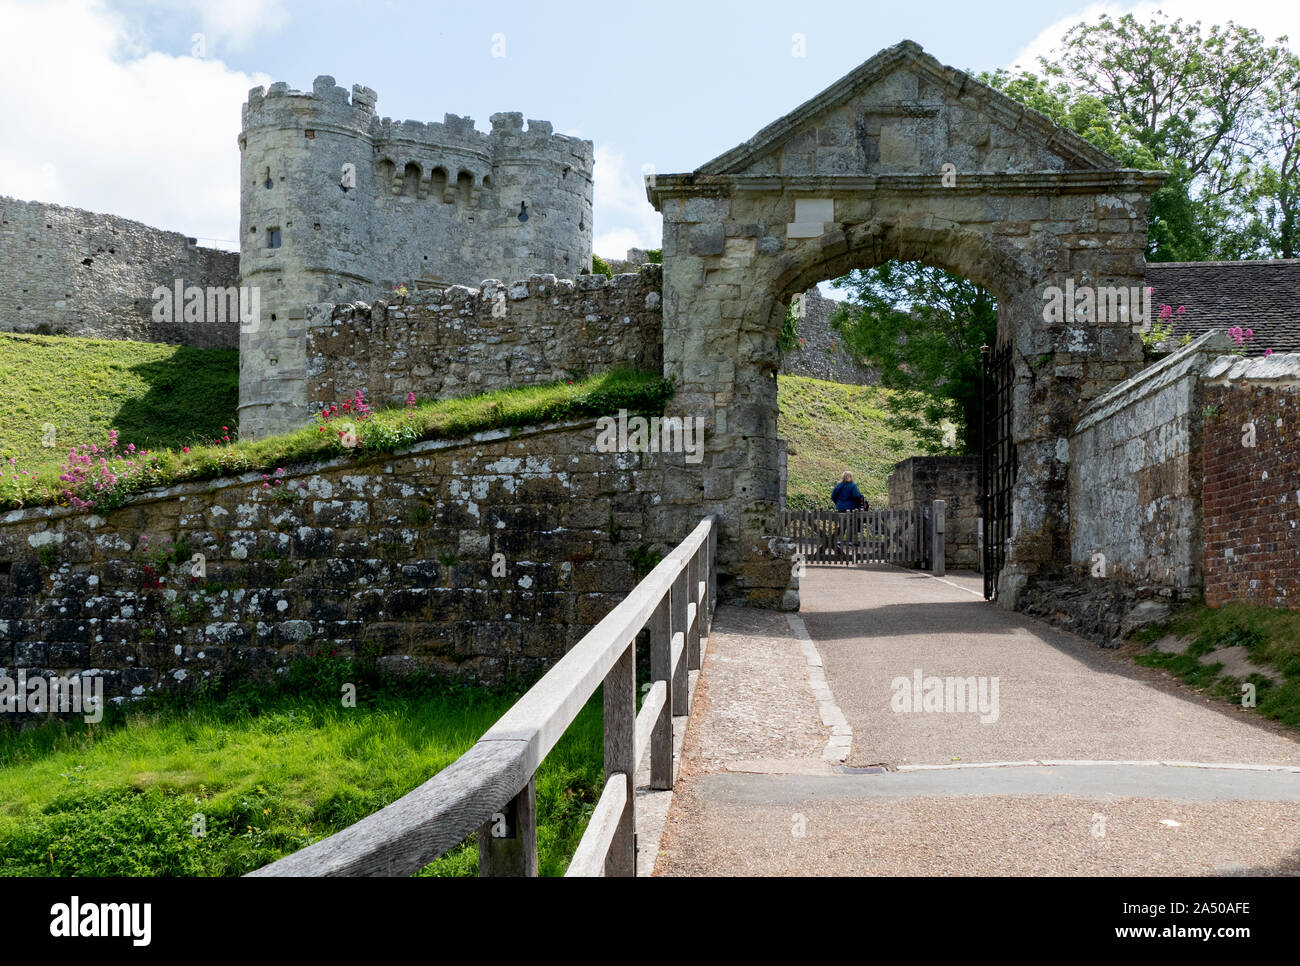 The arched gateway entrance to the entry tower of Carisbrooke Castle on the Isle of Wight, UK Stock Photo